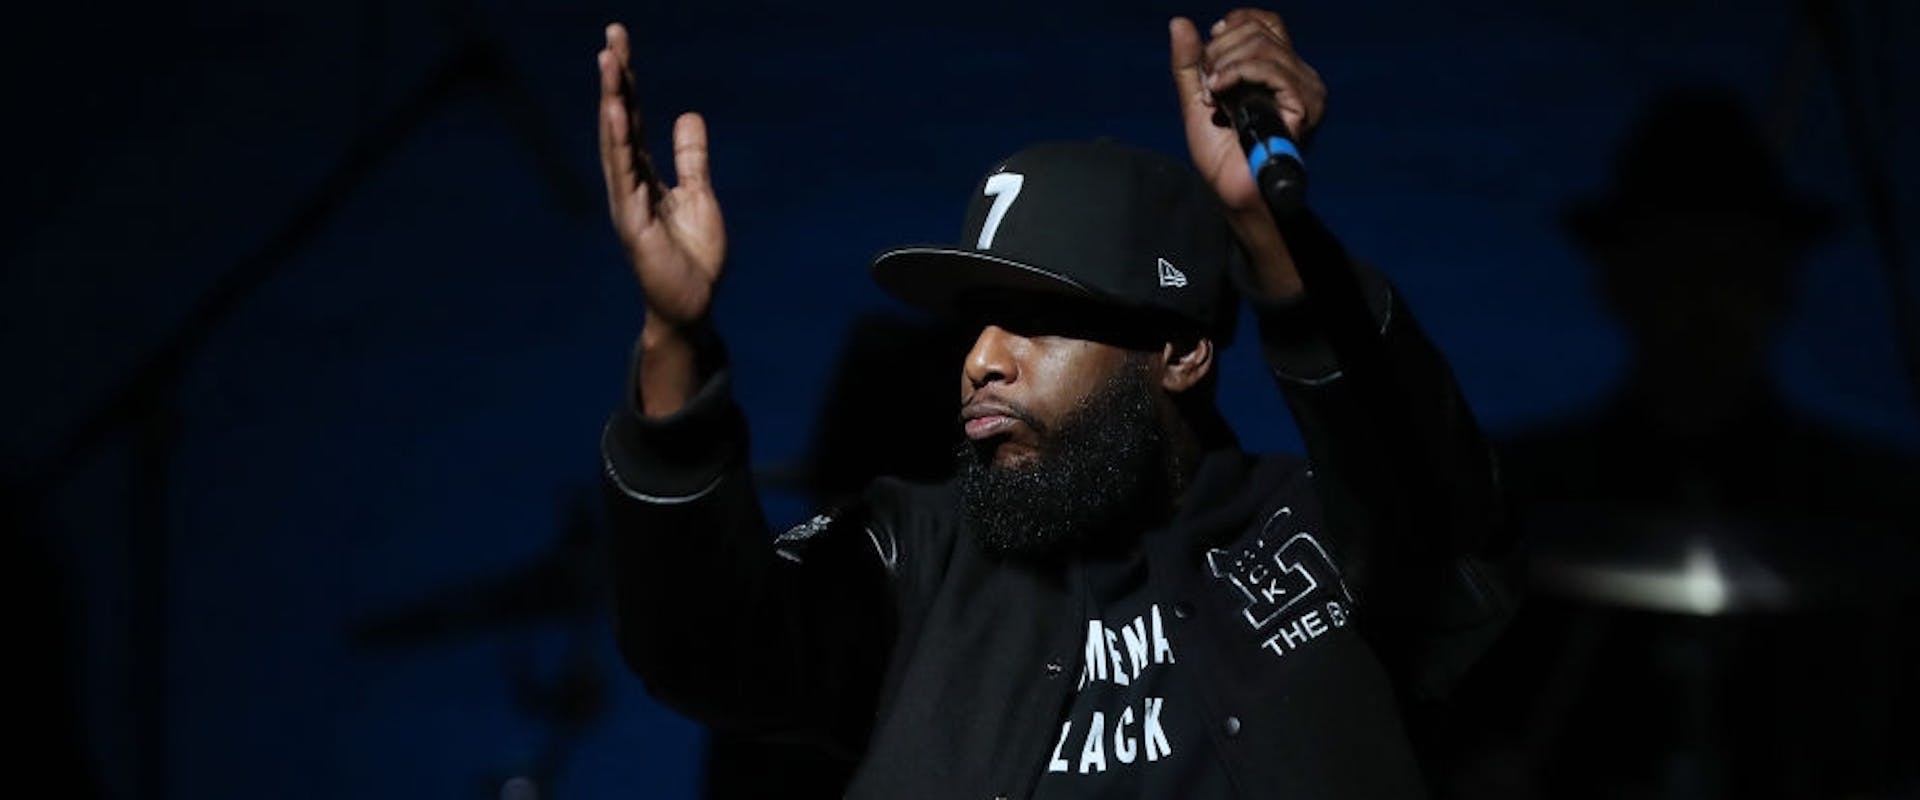 Rapper Talib Kweli performs during City Winery Presents: Harry Belafonte's 93rd Birthday Celebration at The Apollo Theater on March 01, 2020 in New York City. 